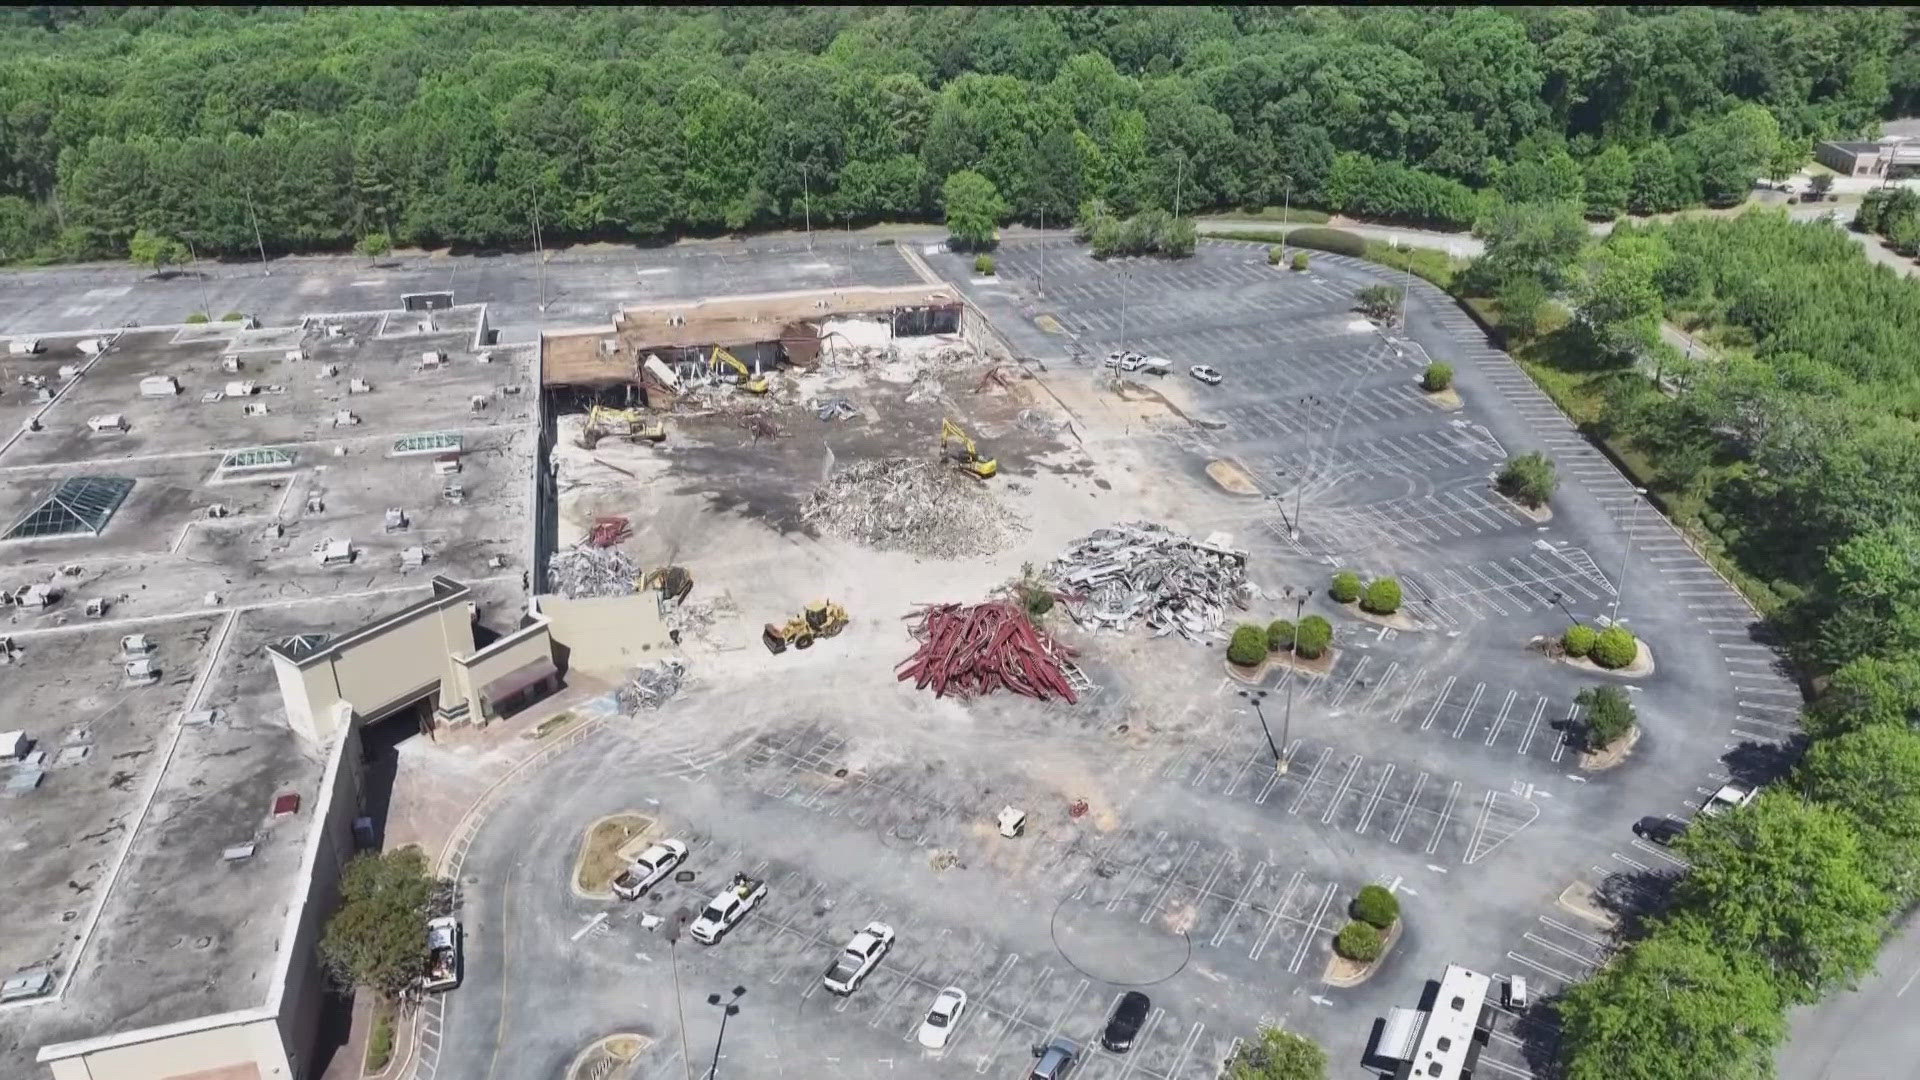 Today was "Demolition Day" for North DeKalb Mall, which will be replaced by the 73-acre mixed-use Lulah Hills development.